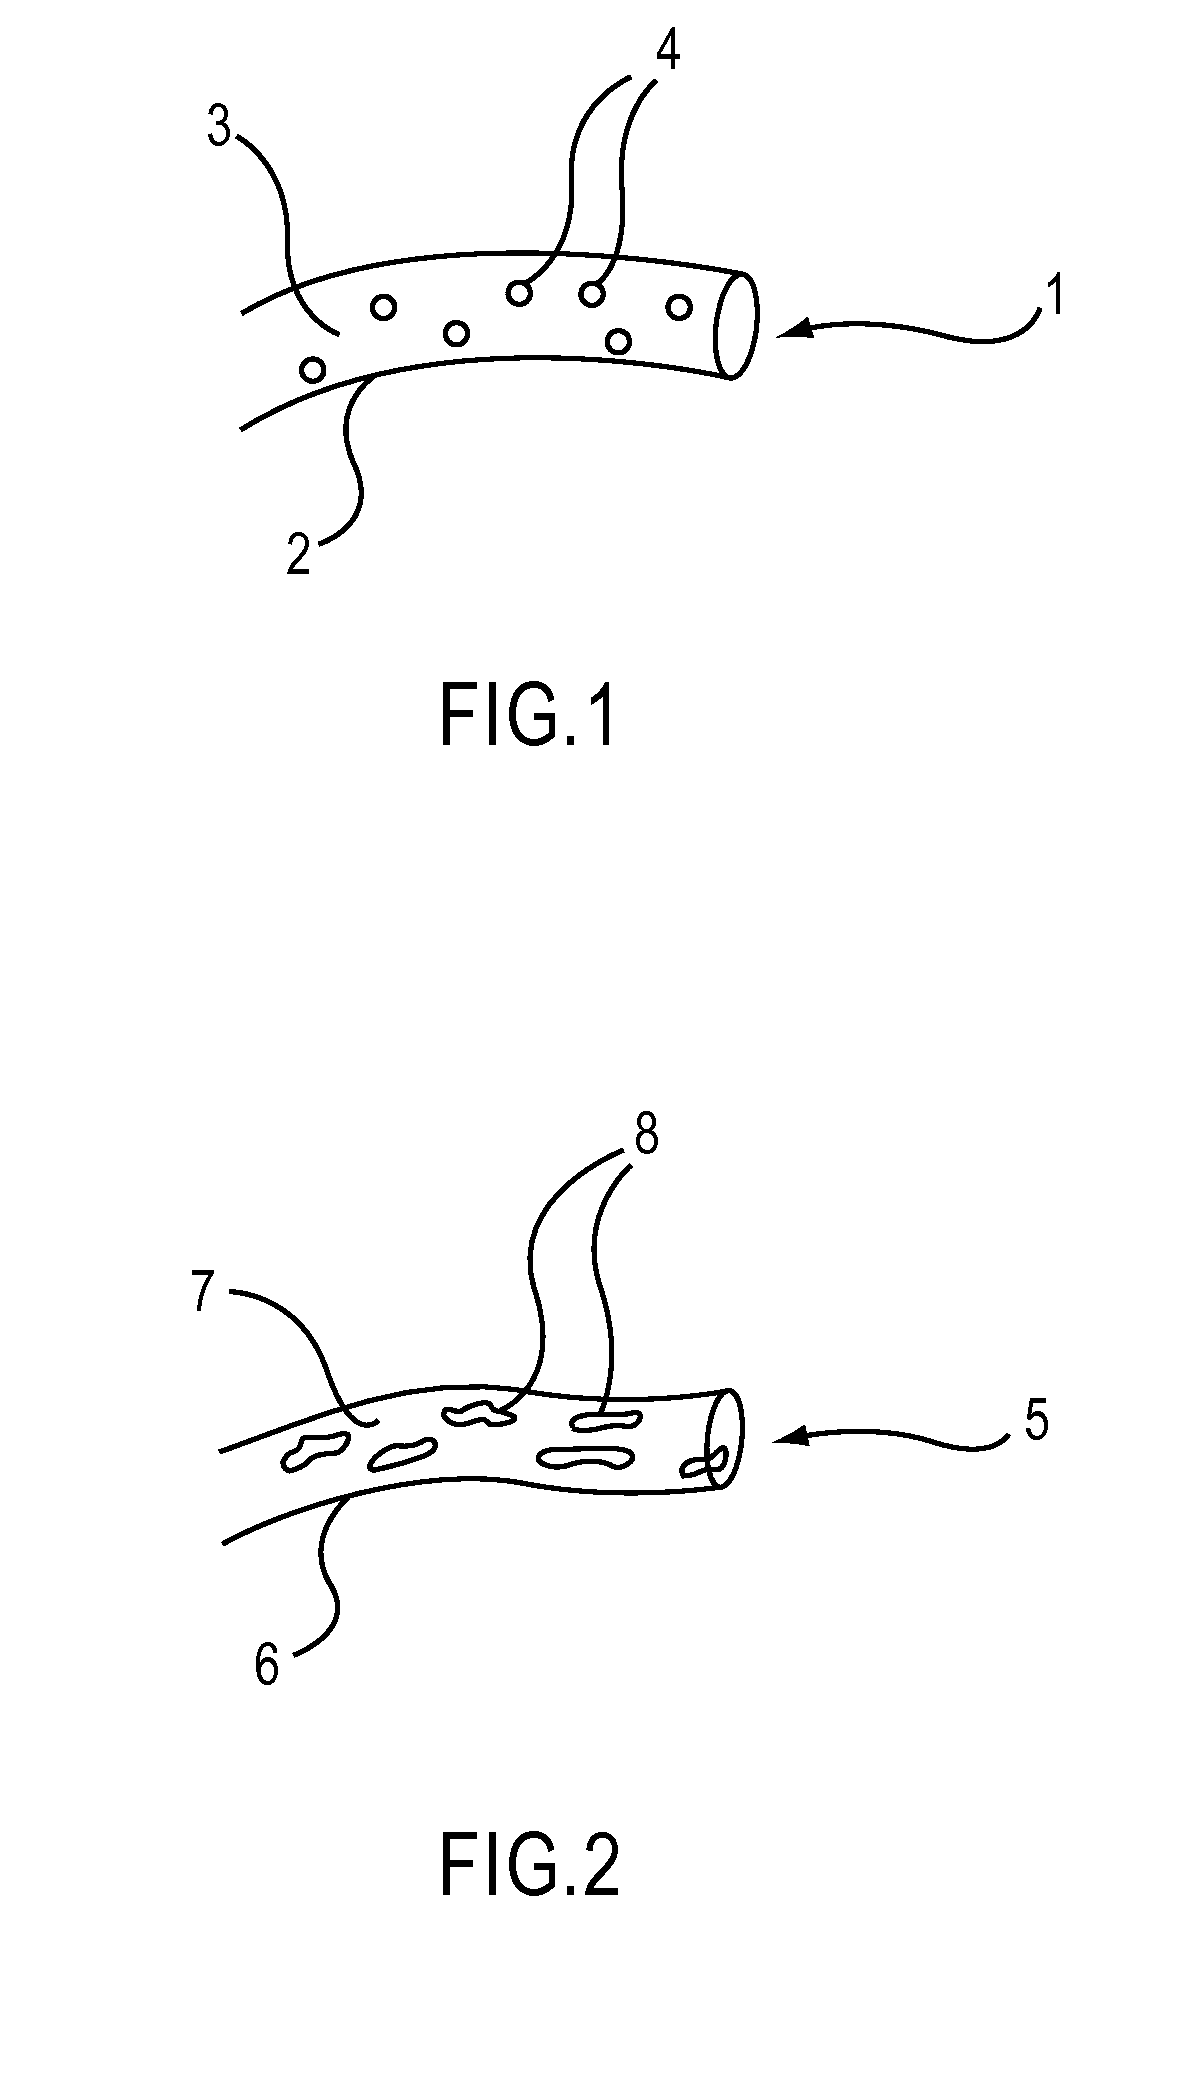 Fibers and articles having combined fire resistance and enhanced reversible thermal properties